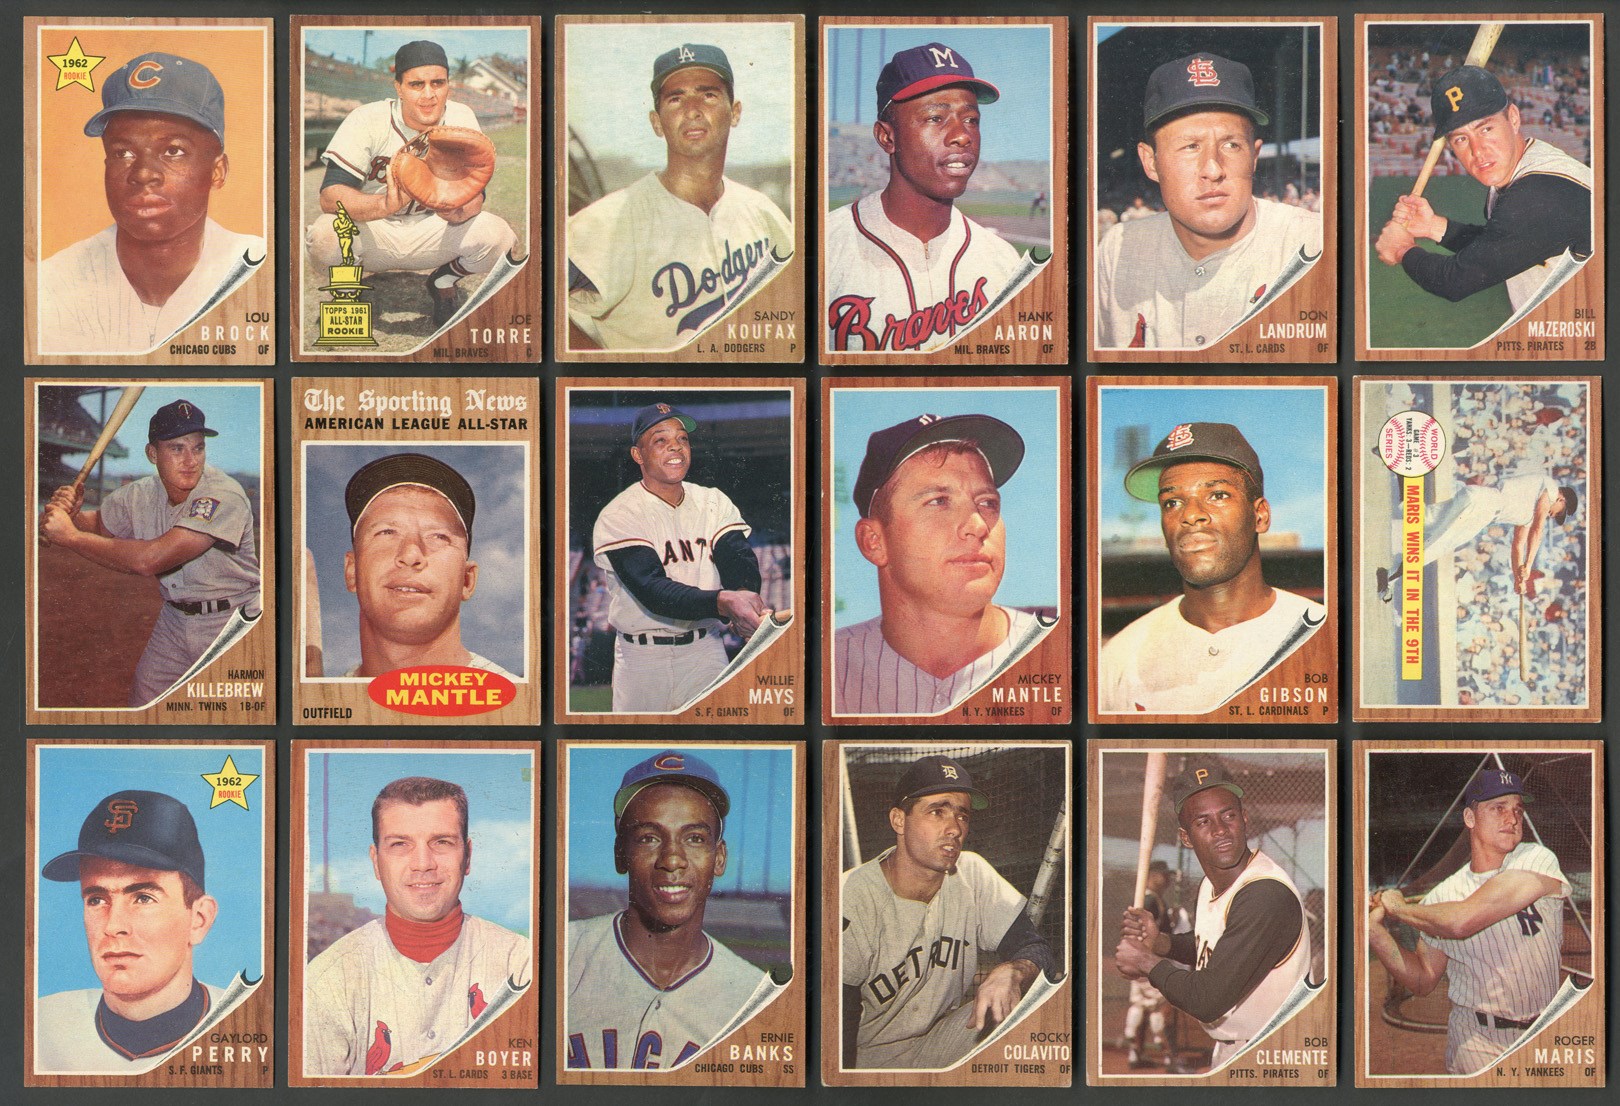 1962 Topps Baseball Complete Master Set with all Green Tint, Pose and Emblem Variations - Total of 692 Cards